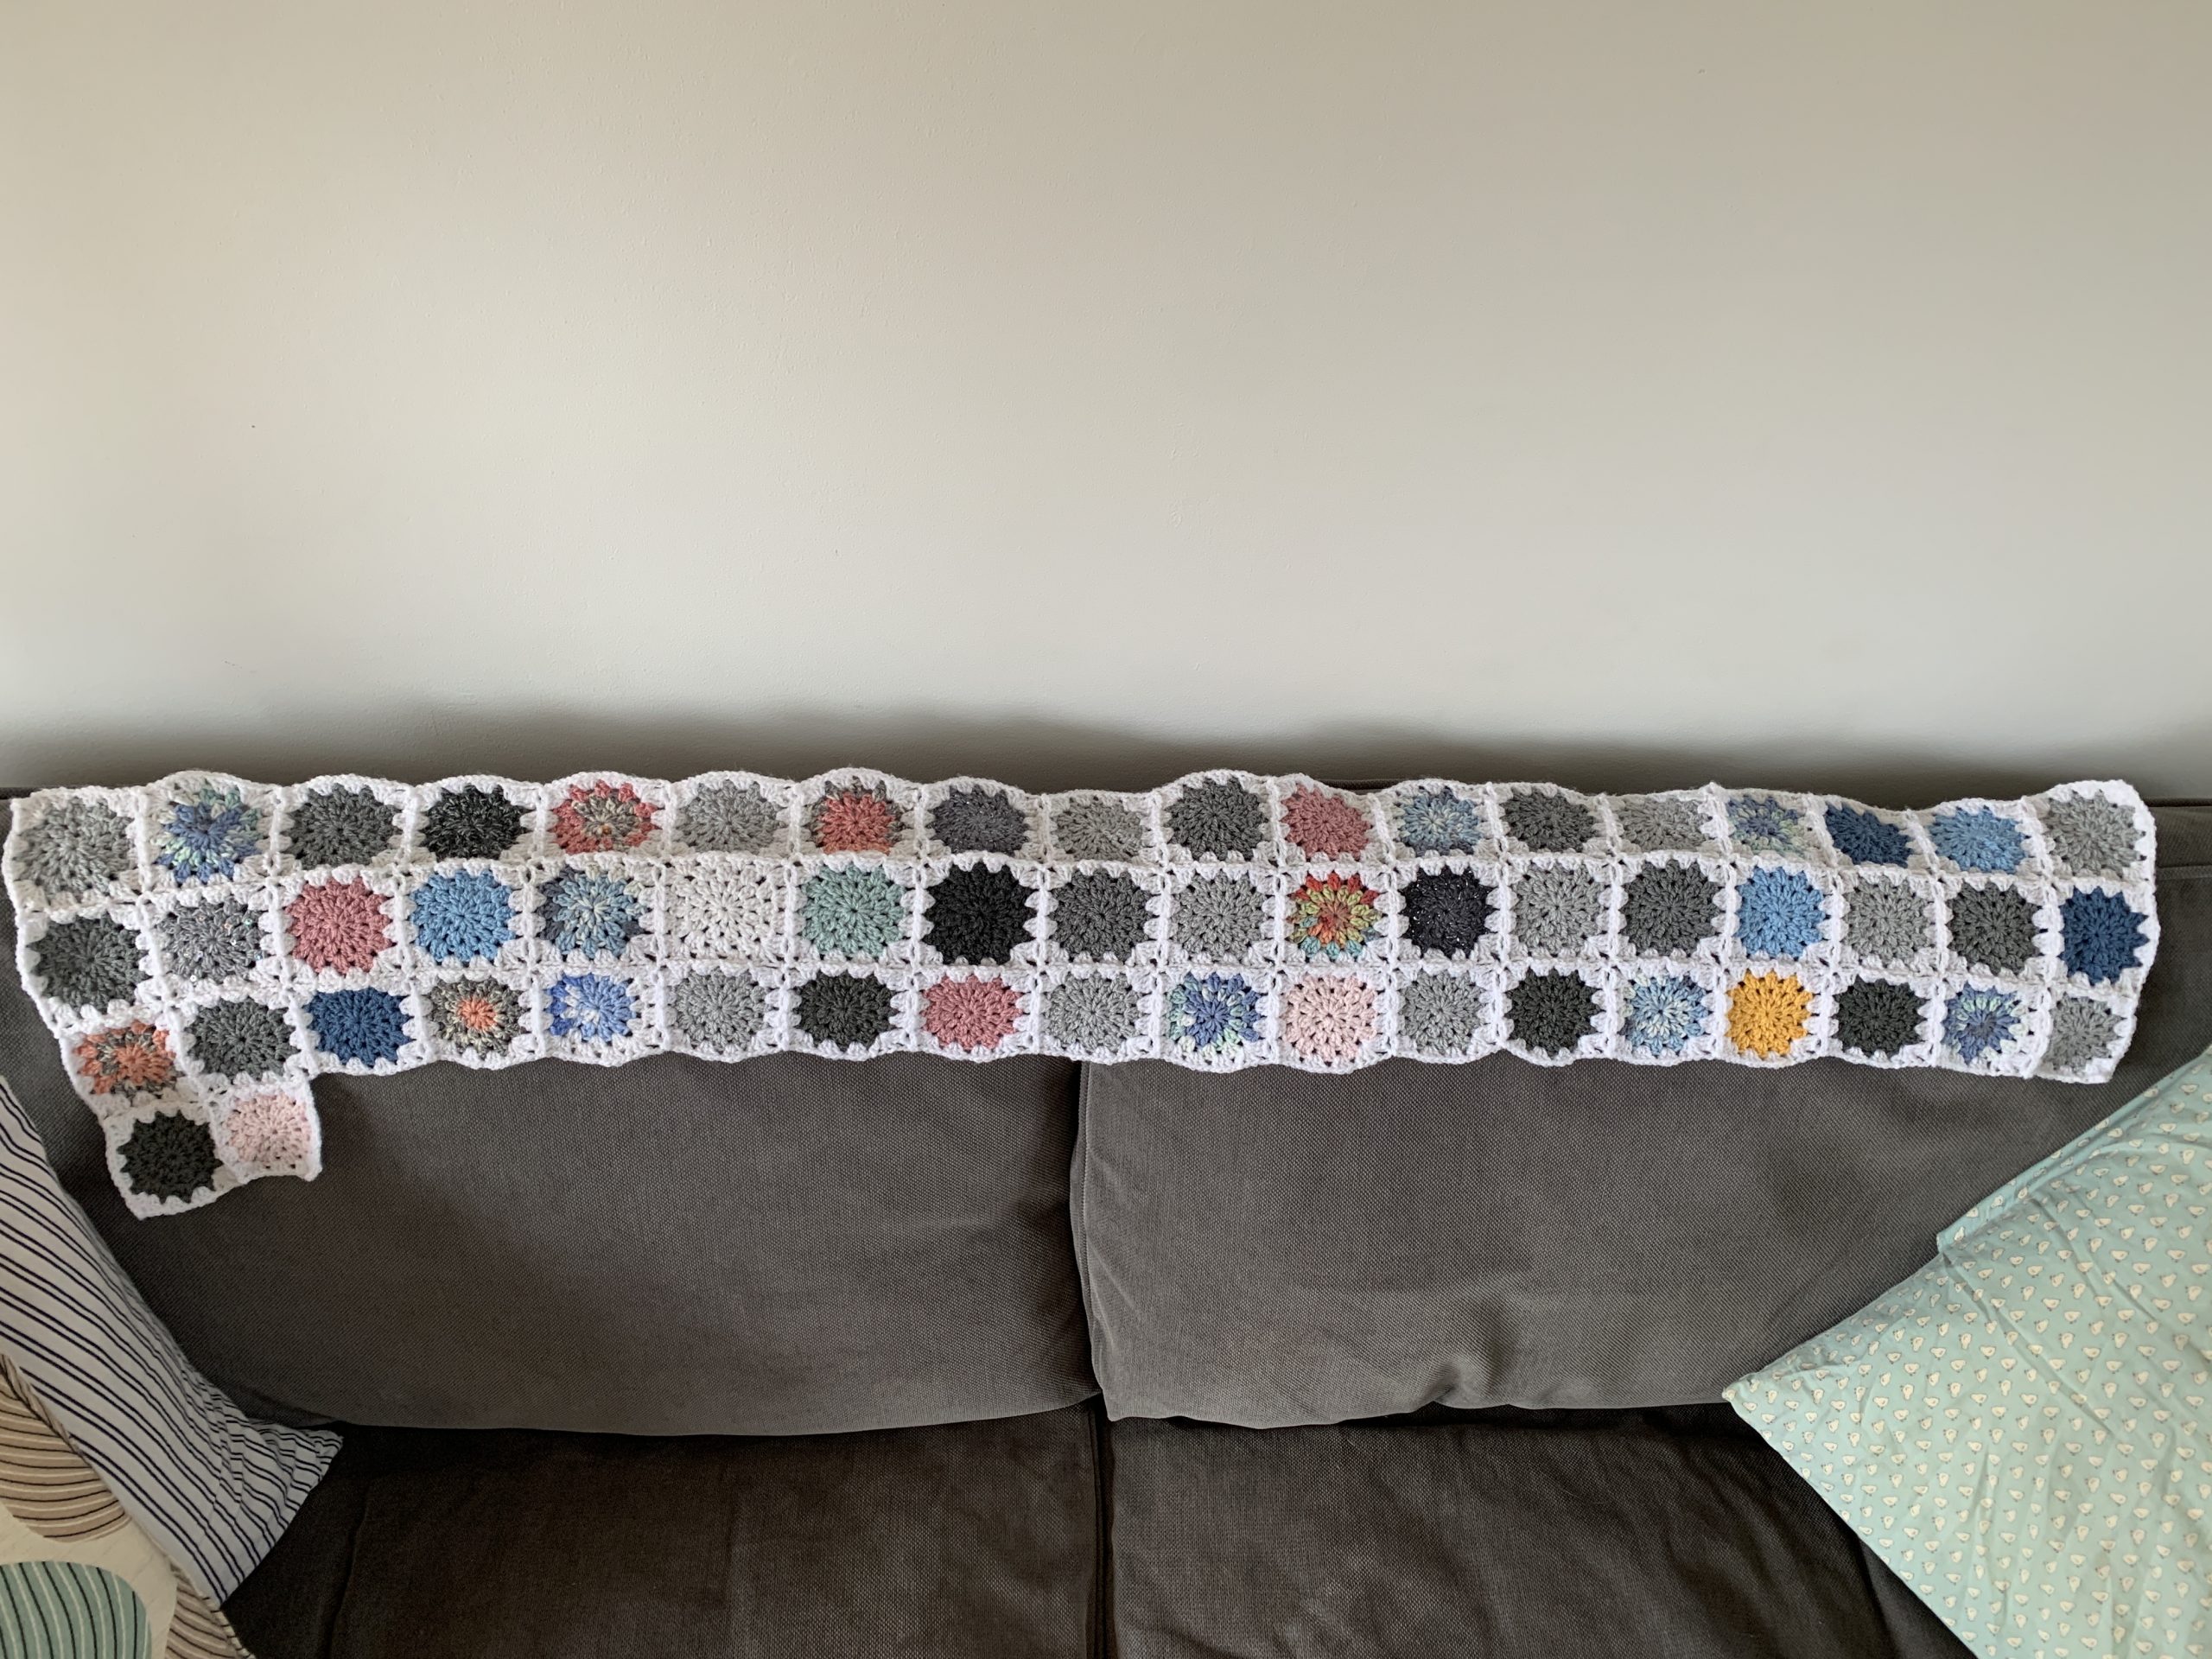 the beginnings of a crochet blanket laid on the back of a sofa